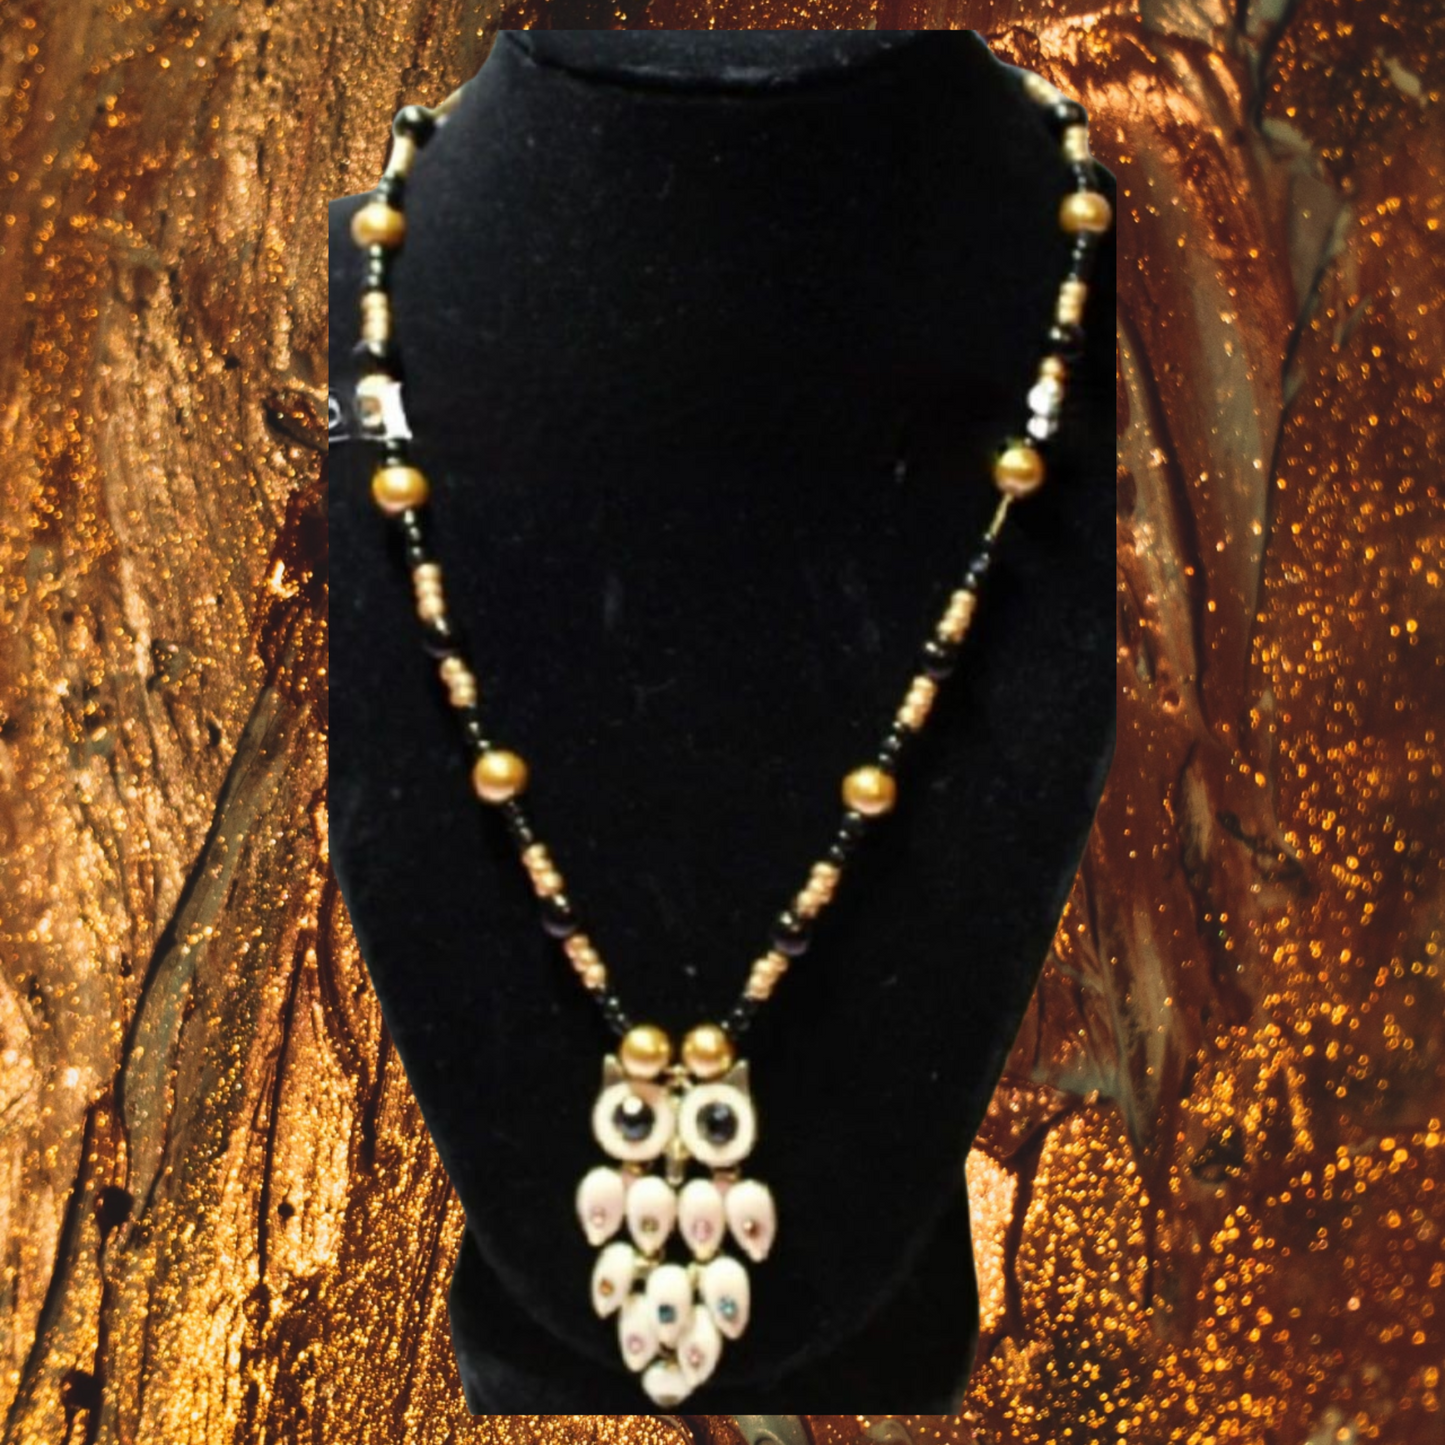 Gold Owl Pendant Bead Necklace